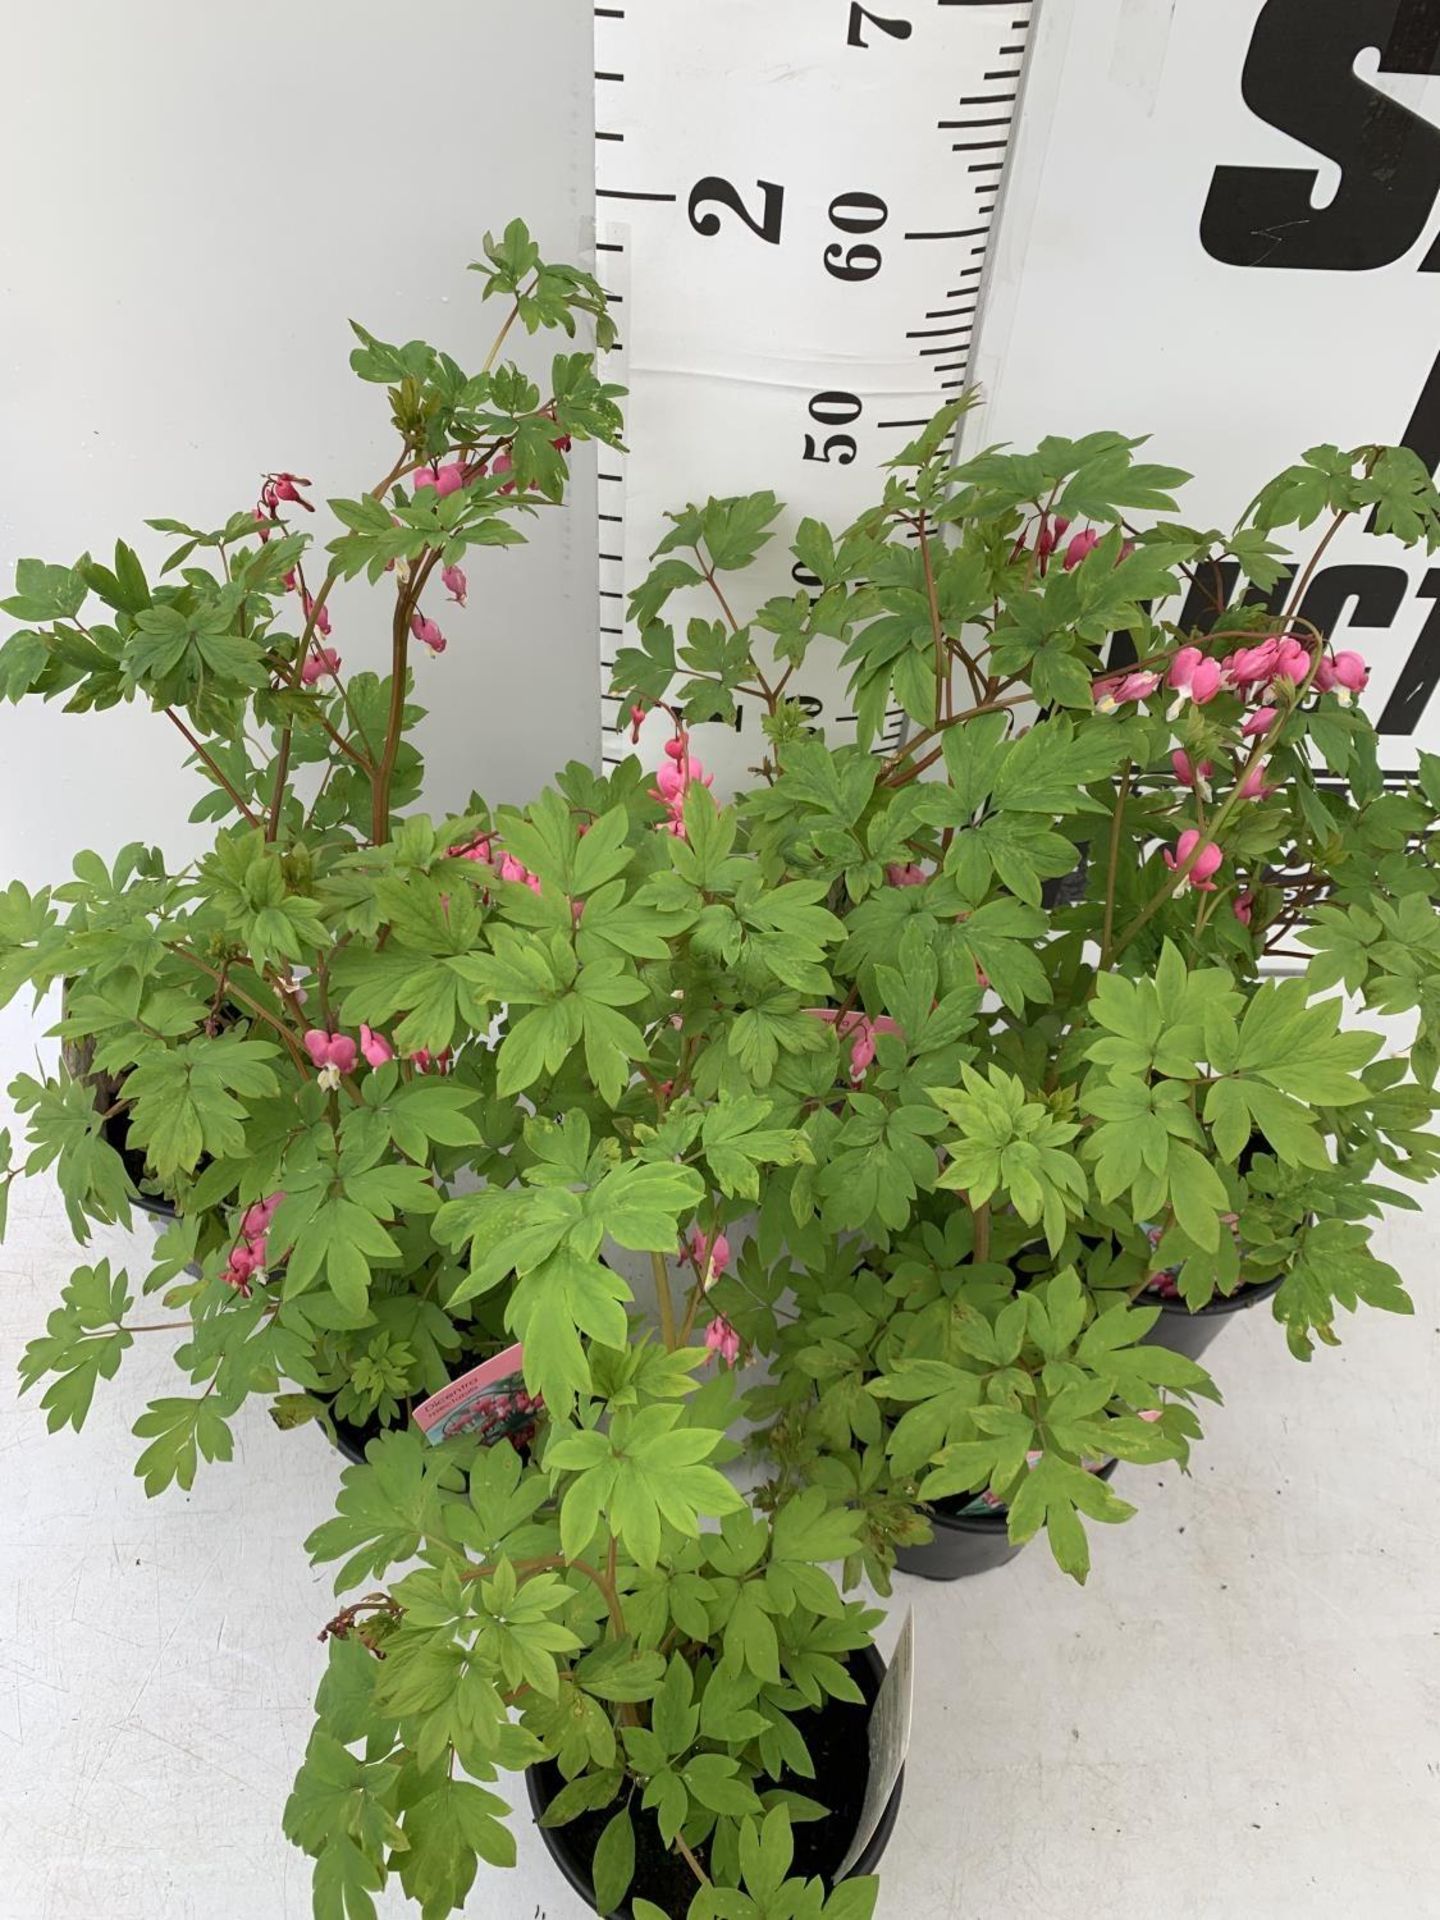 SIX DICENTRA SPECTABILIS BLEEDING HEART 50CM TALL IN 2 LTR POTS TO BE SOLD FOR THE SIX PLUS VAT - Image 4 of 9